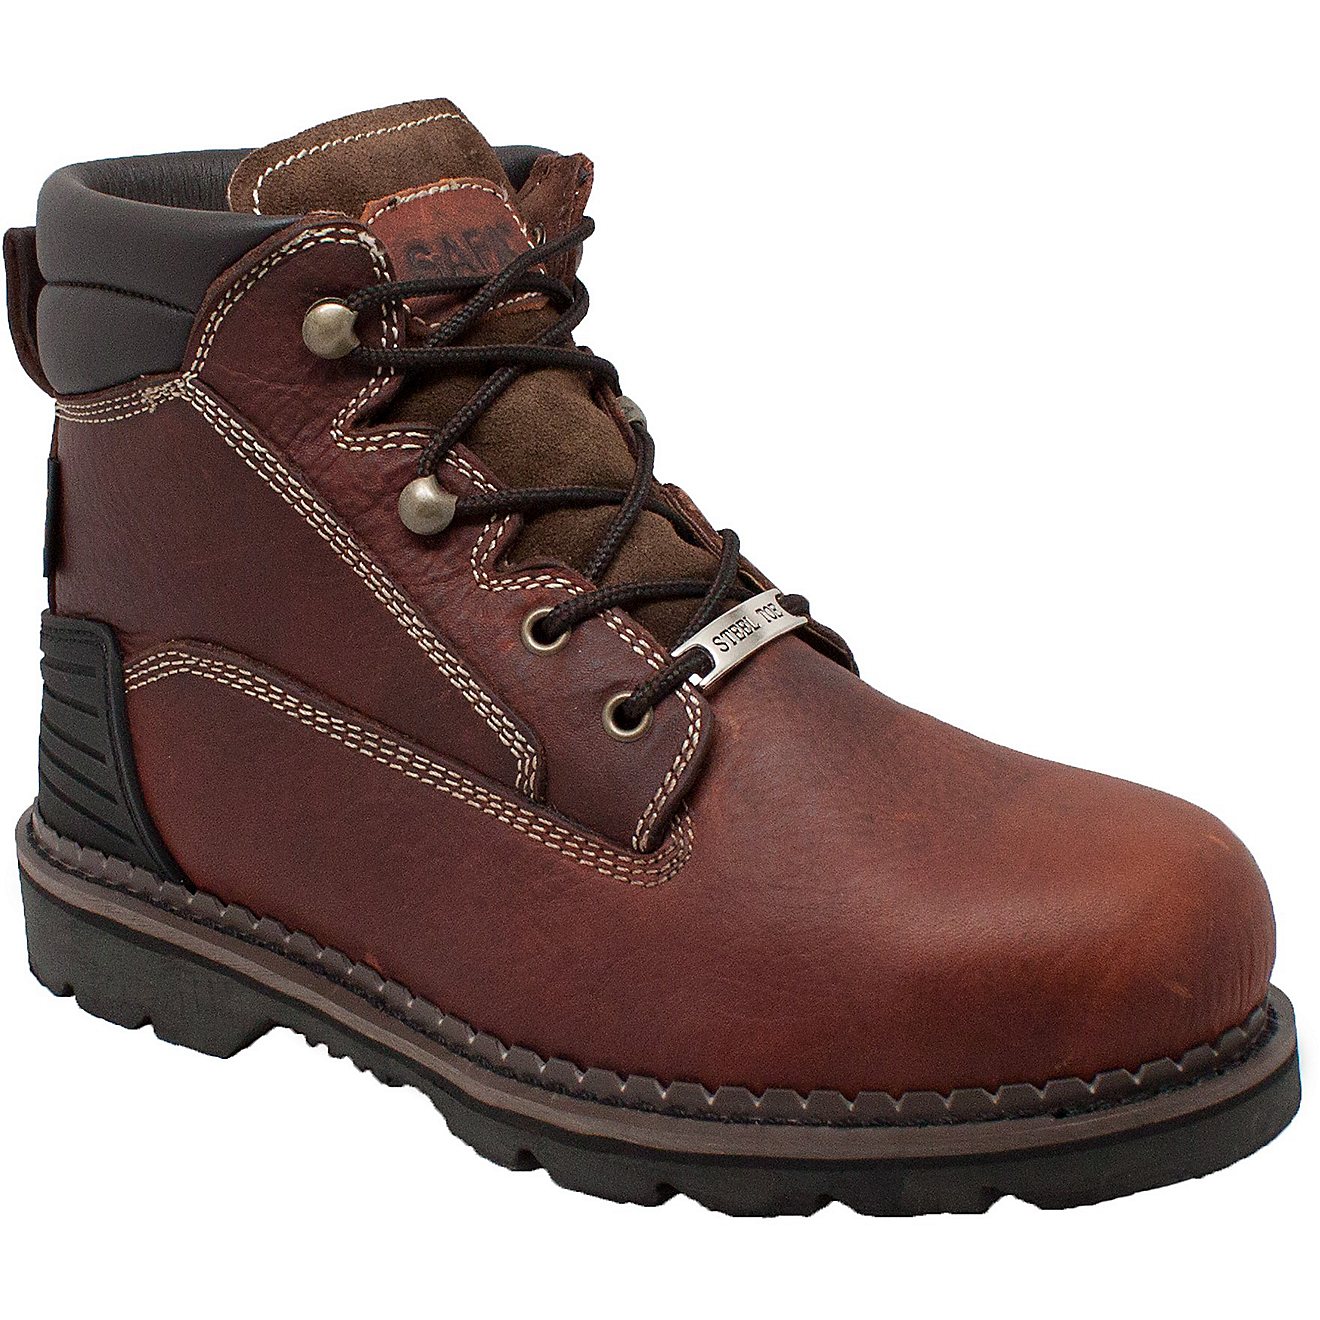 AdTec Men's 6 in Lace Up Steel Work Boots                                                                                        - view number 2